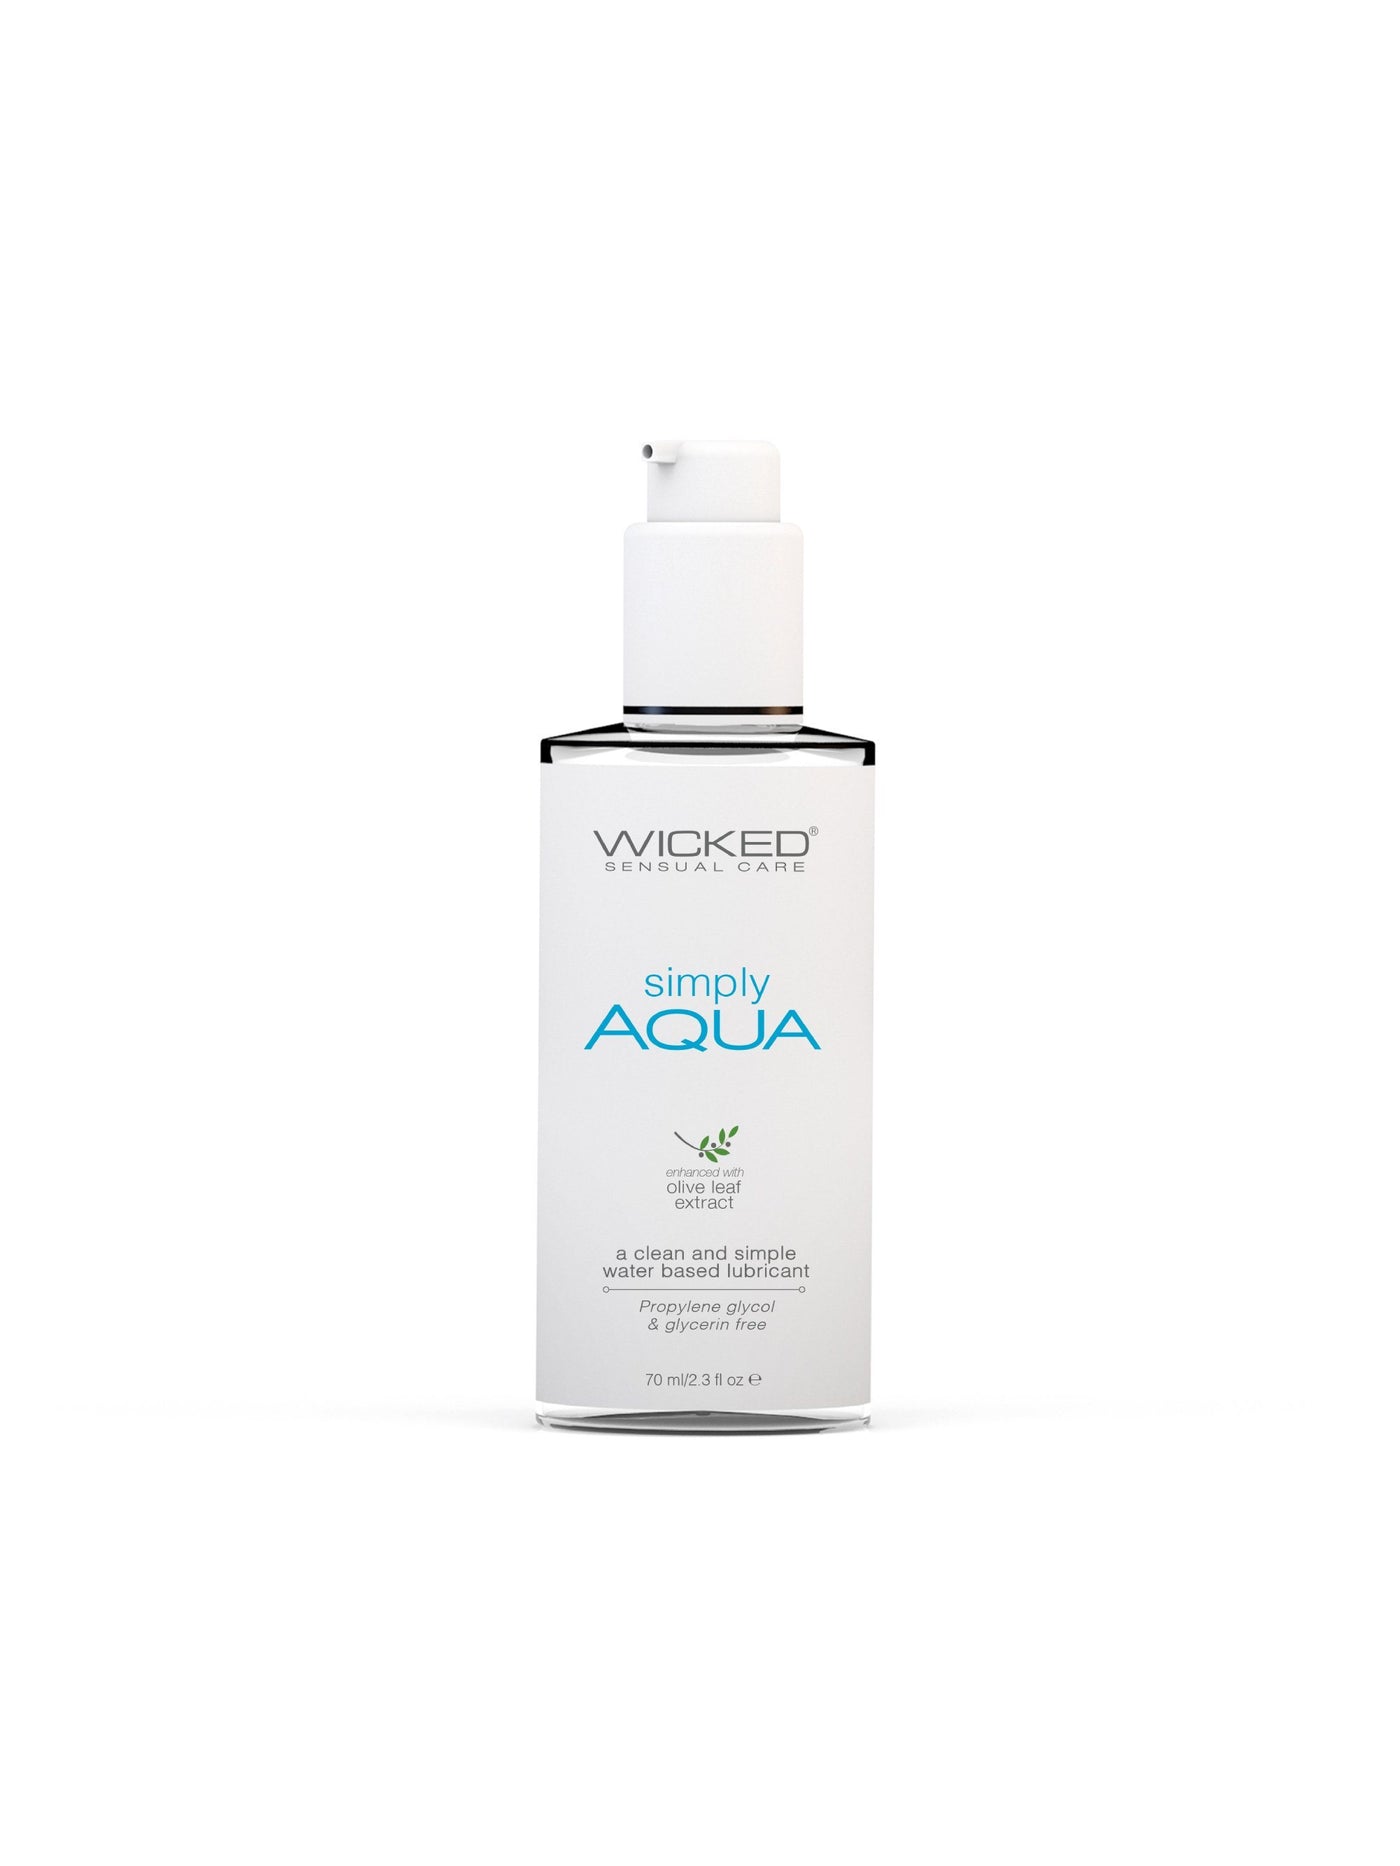 Simply Aqua Water Based Lubricant Lubes and Massage Wicked Sensual Care 2.3 oz 